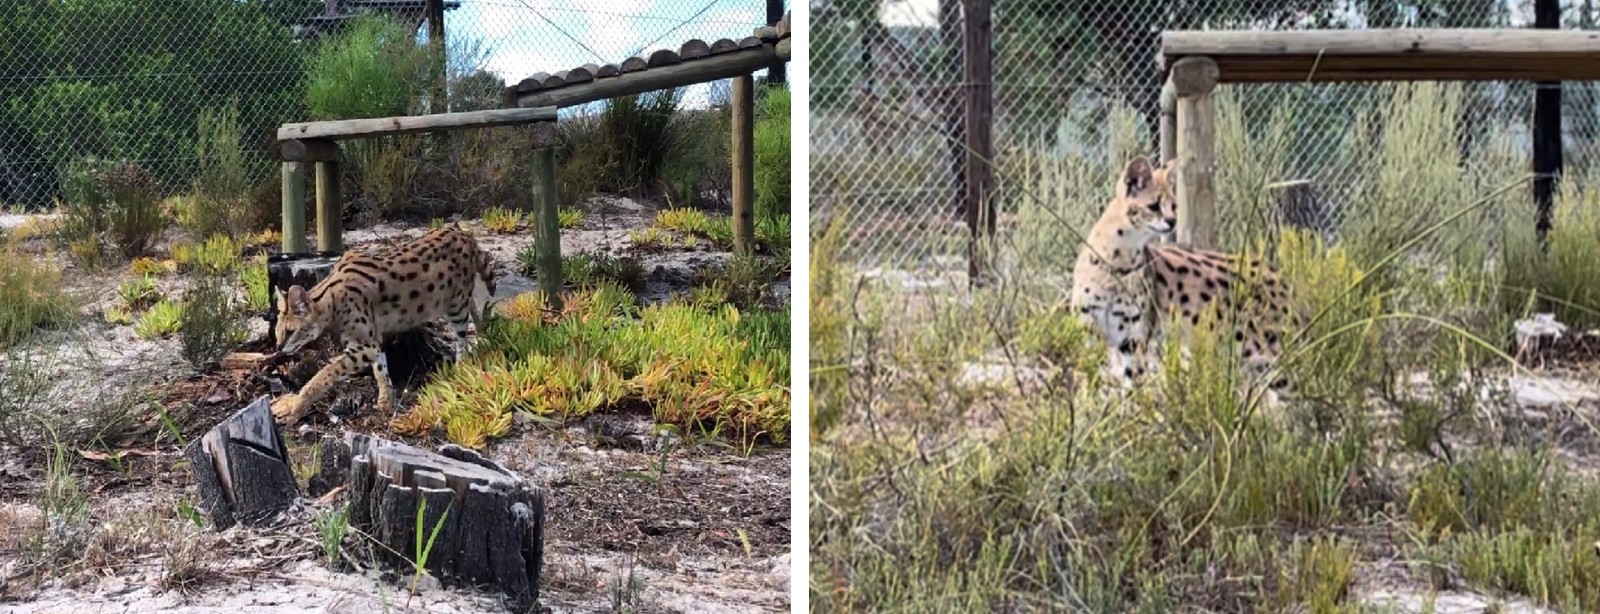 Two photos of individual serval cats exploring their new home in Africa.